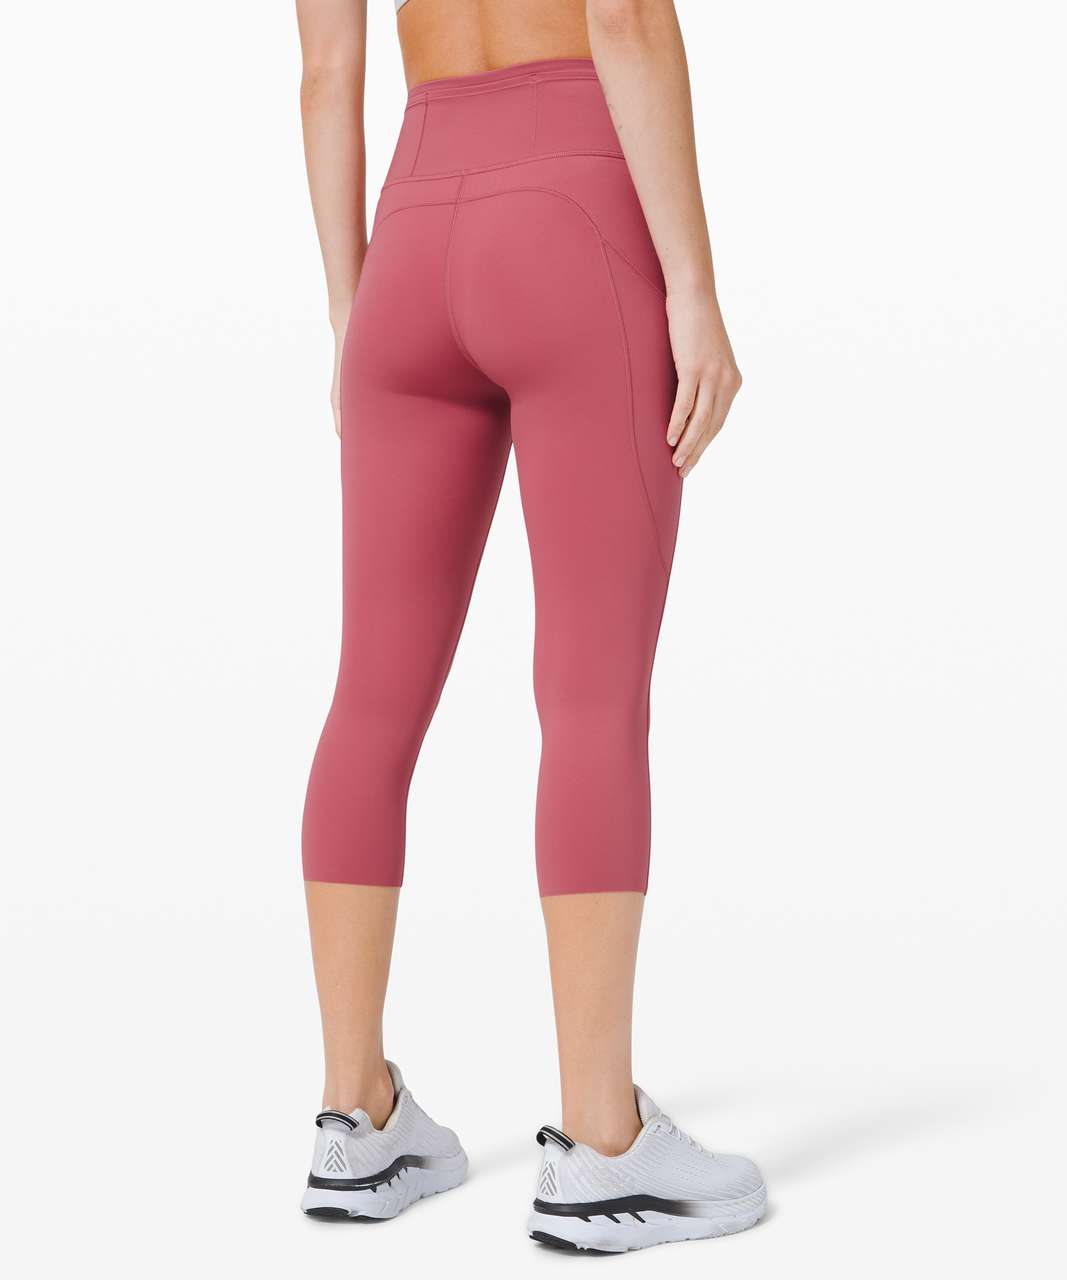 Lululemon Fast and Free Crop II 19" *Non-Reflective Cool - Cherry Tint